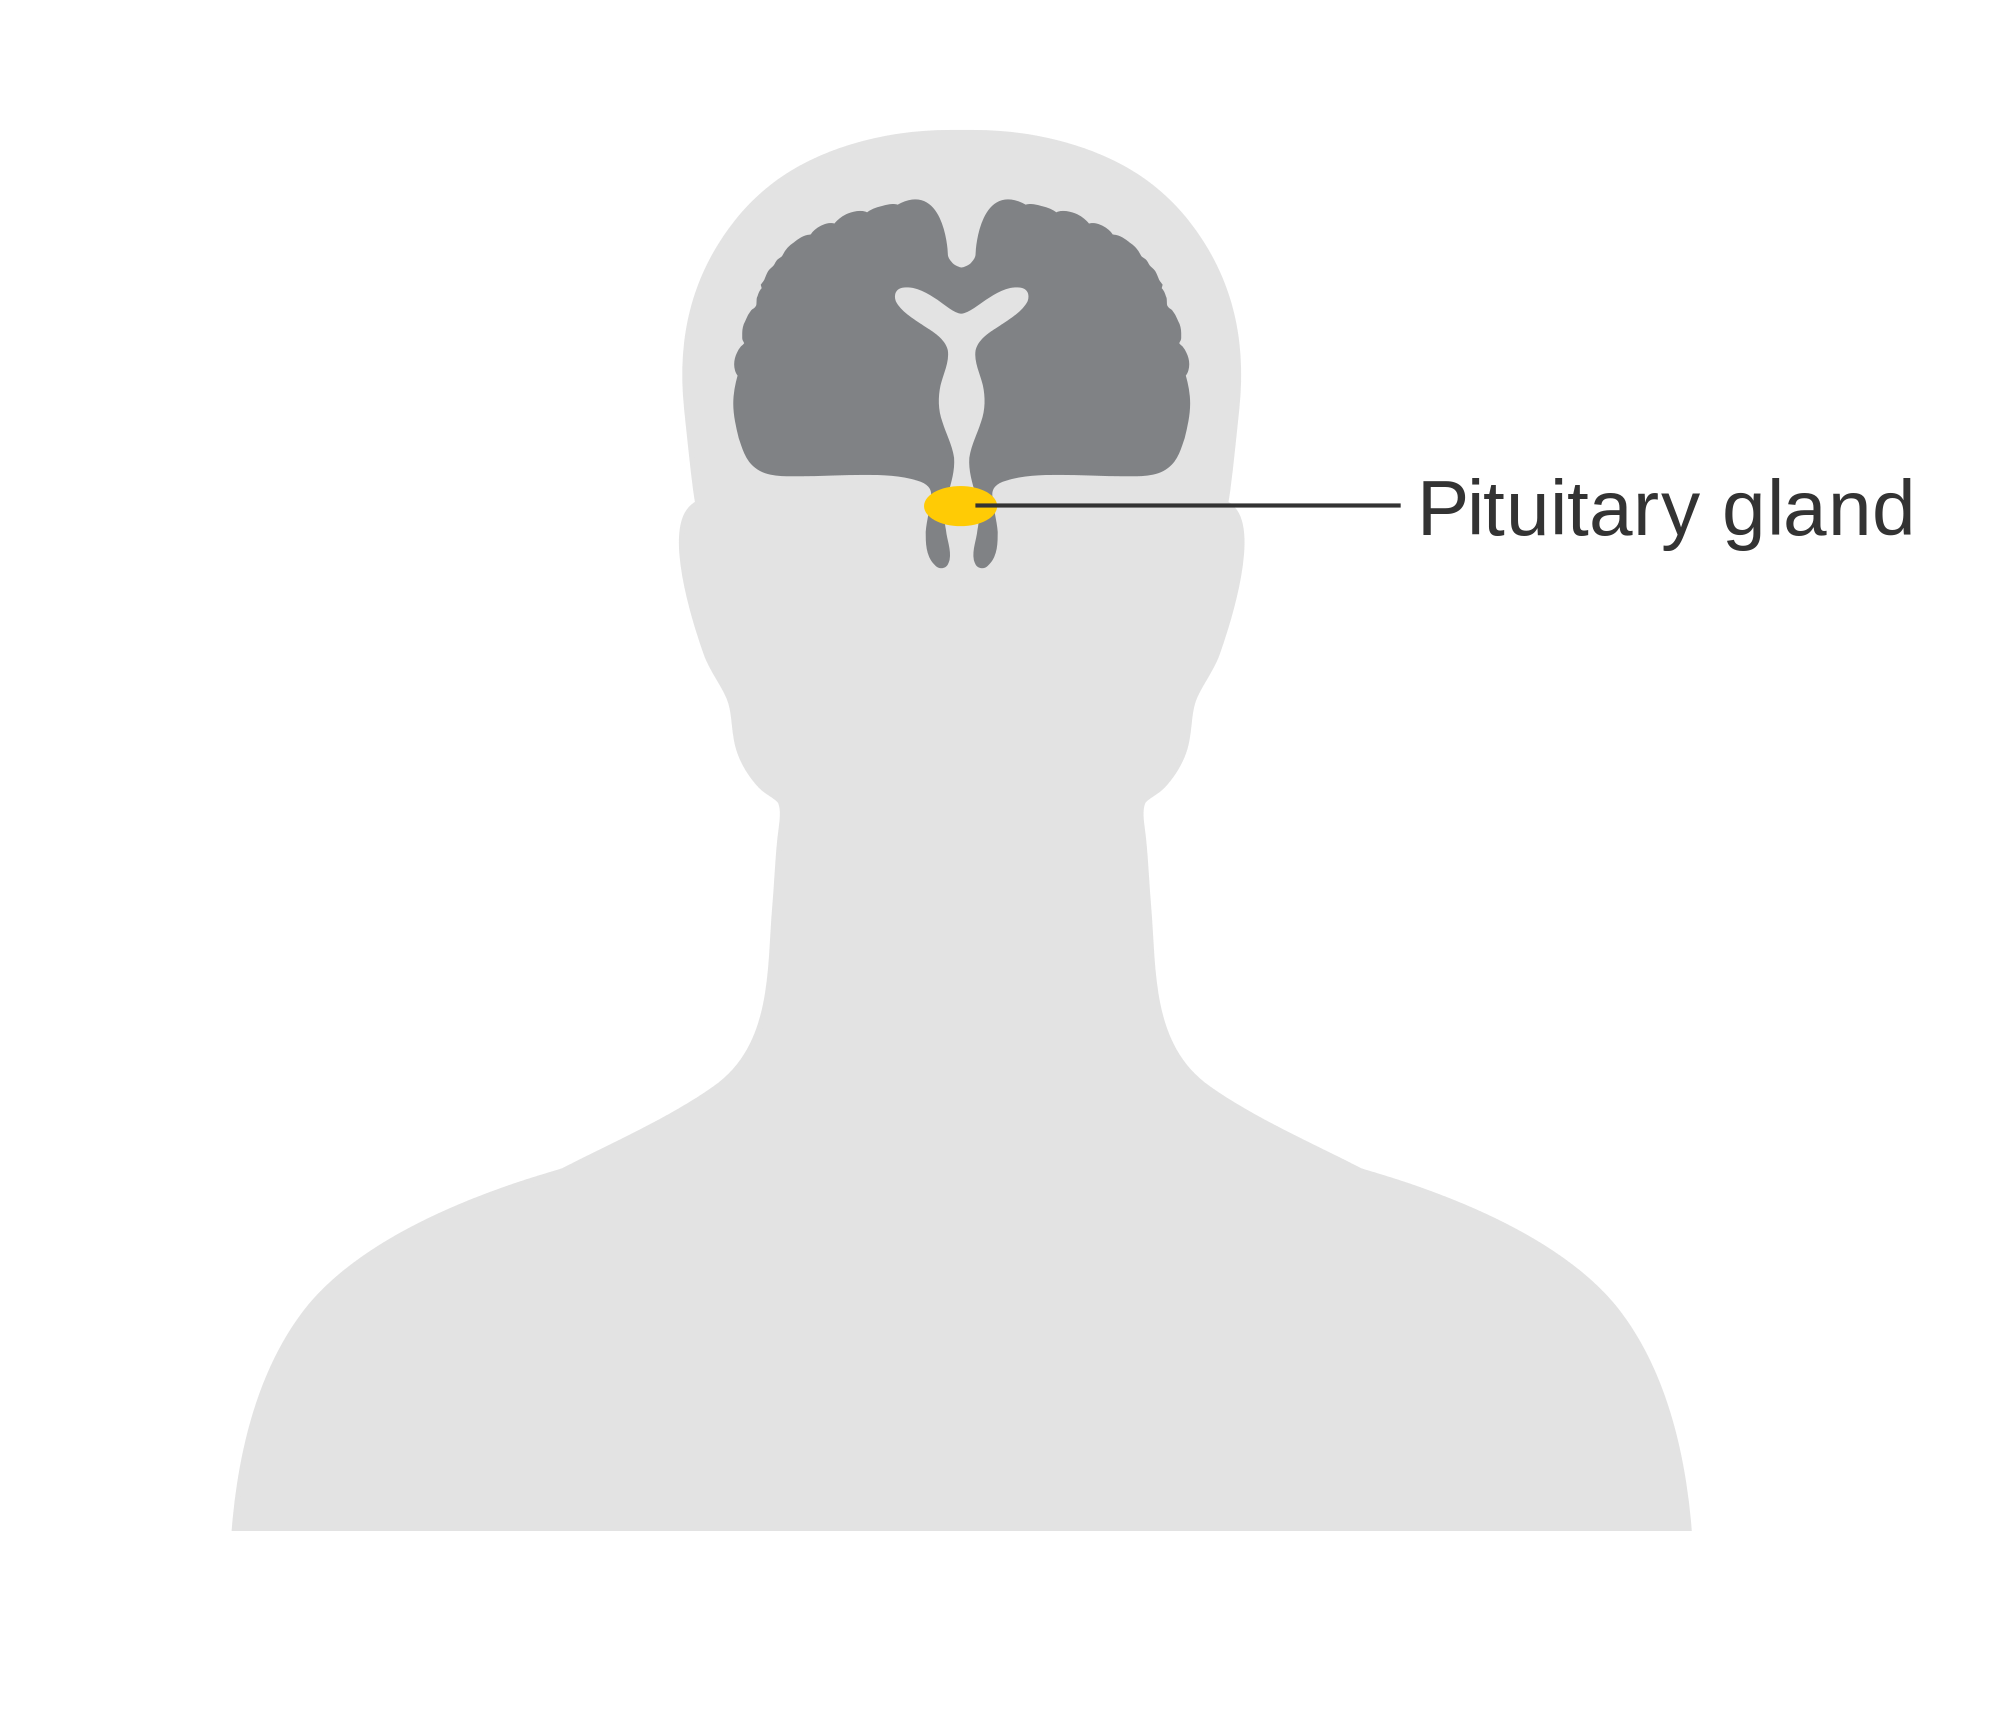 diagram_showing_the_position_of_the_pituitary_gland_in_the_brain_cruk_413-svg